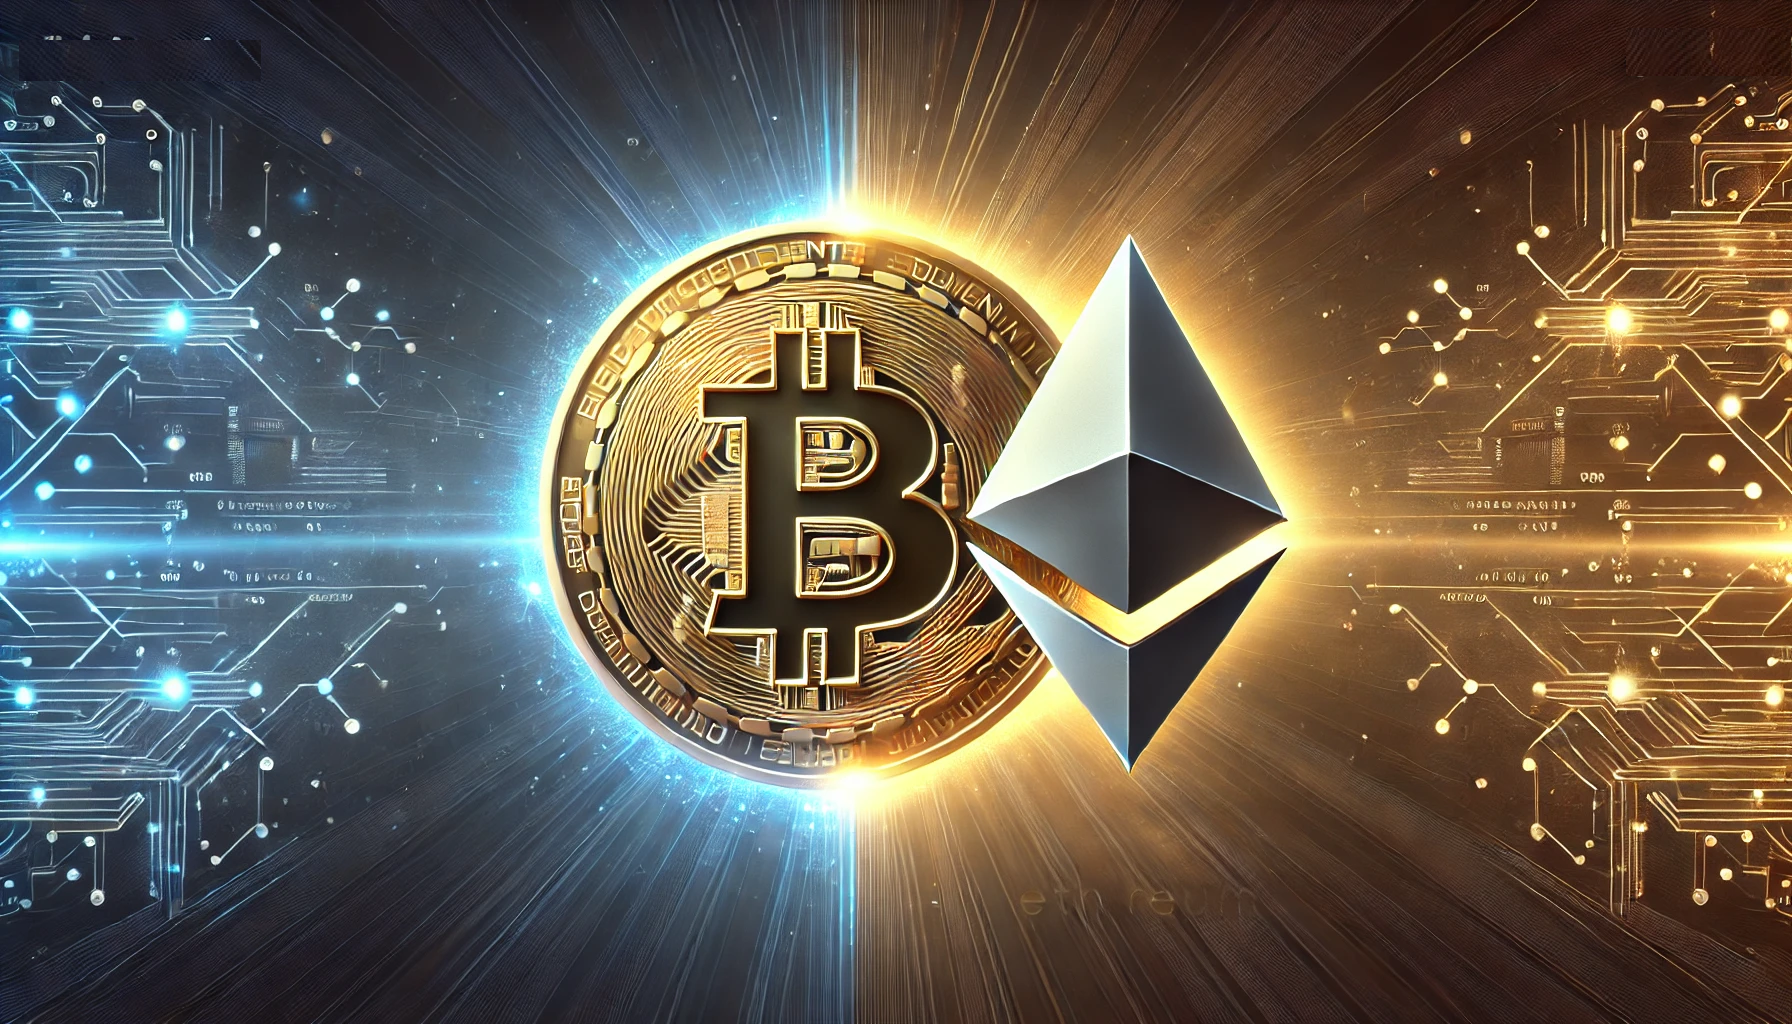 3 Reasons To Invest In Ethereum, 1 To Stay Bitcoin-Only: Bitwise CIO